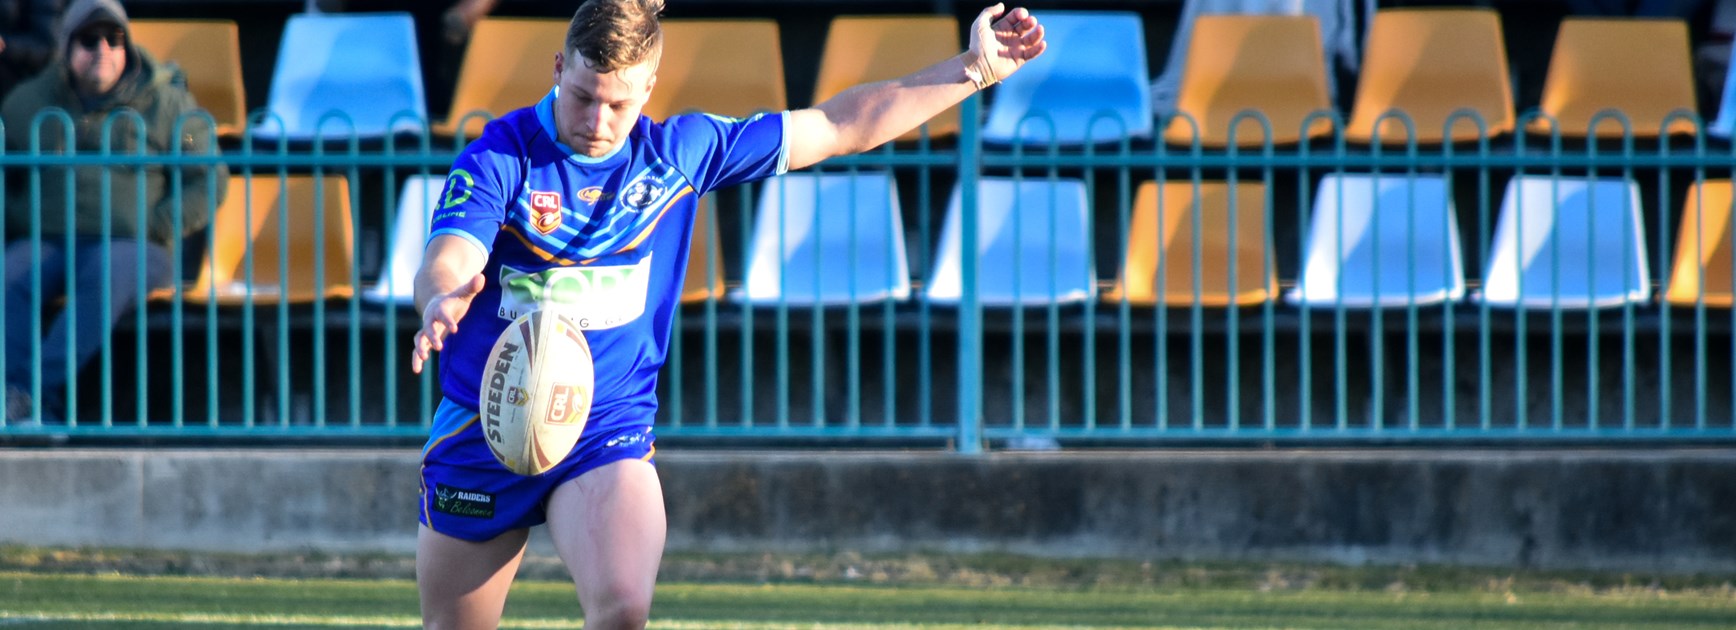 Austbrokers Canberra Raiders Cup Round 13 Preview